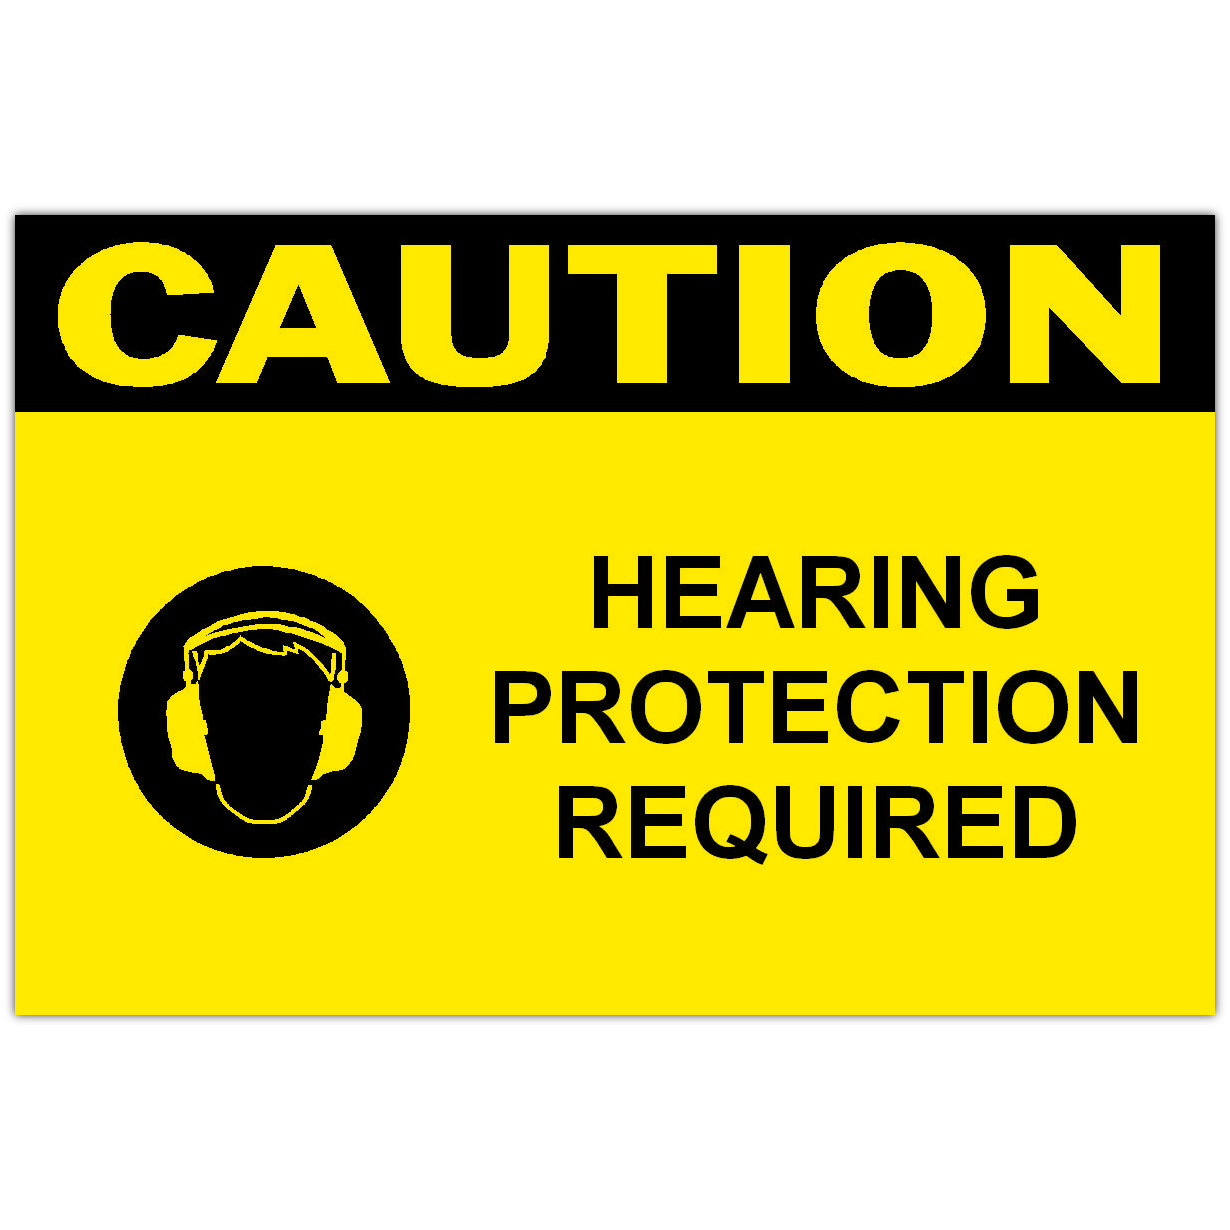 Ask a question about 4" x 6" CAUTION Hearing Protection Required Safety Label